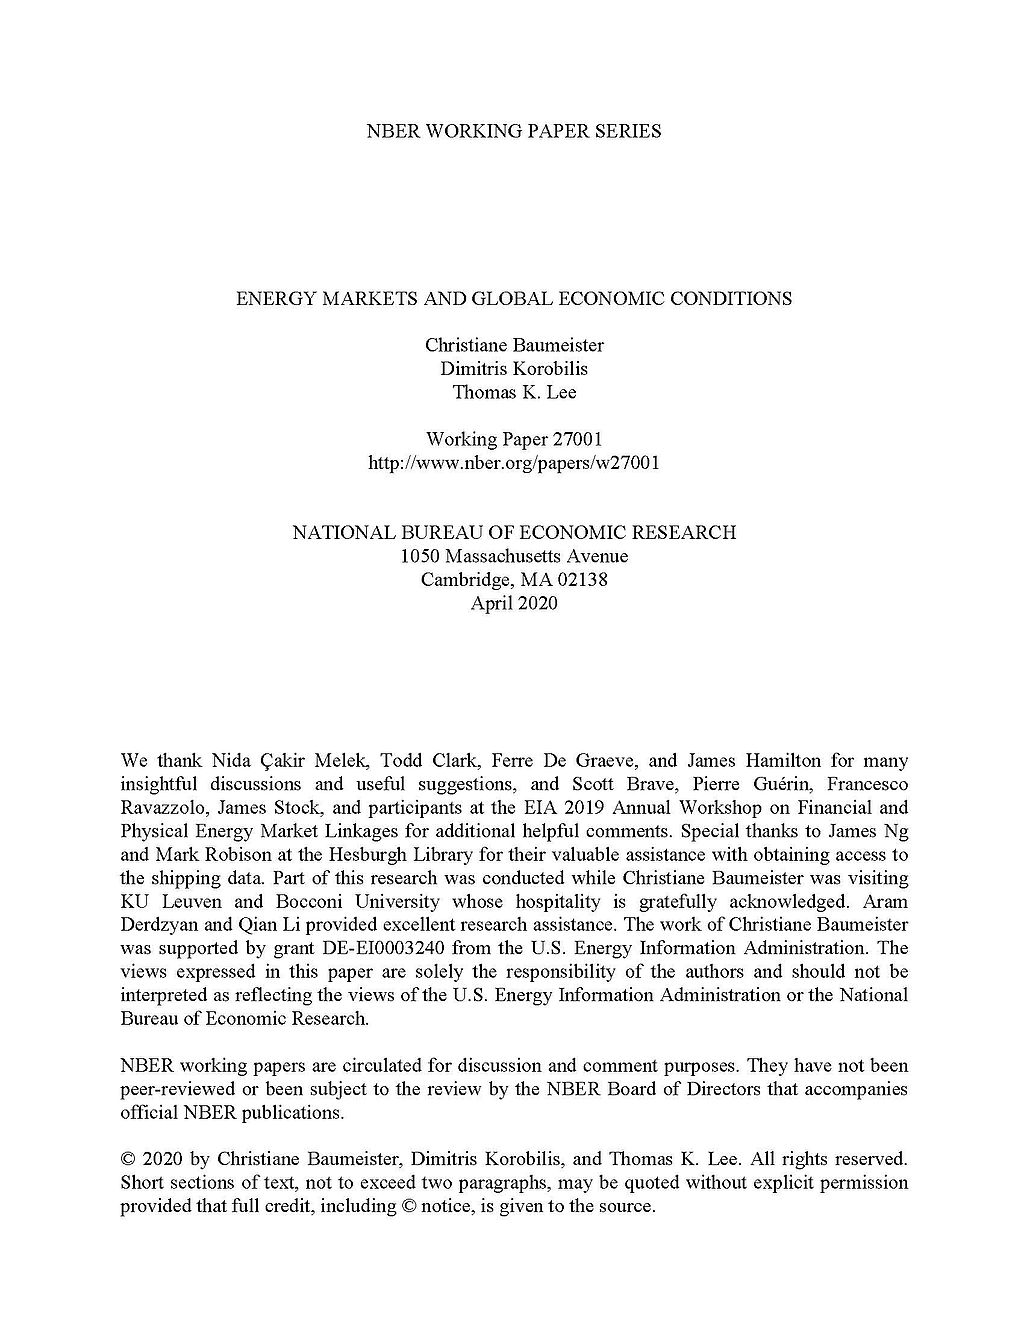 cover_NBER-paper_w27001_Baumeister.jpg